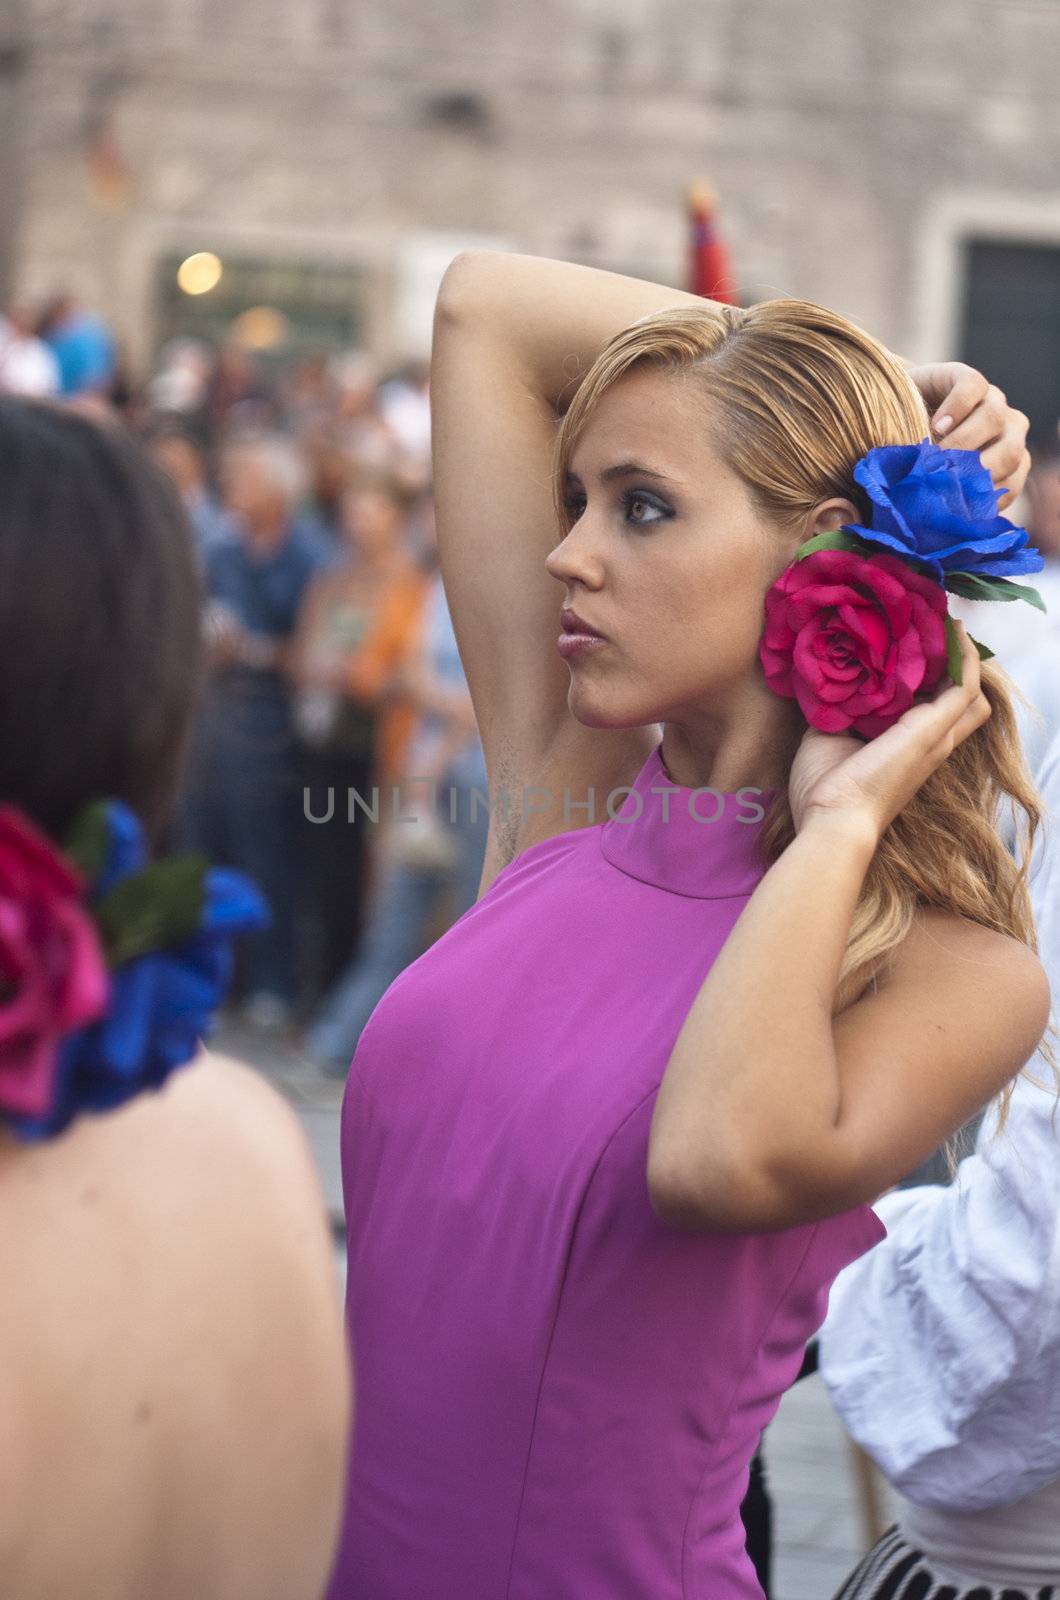 POLIZZI GENEROSA, SICILY-AUGUST 19:Beautiful Woman of Spain folk group at the International "Festival of hazelnuts",dance and parade through the city:August 19, 2012 in Polizzi Generosa,Sicily, Italy